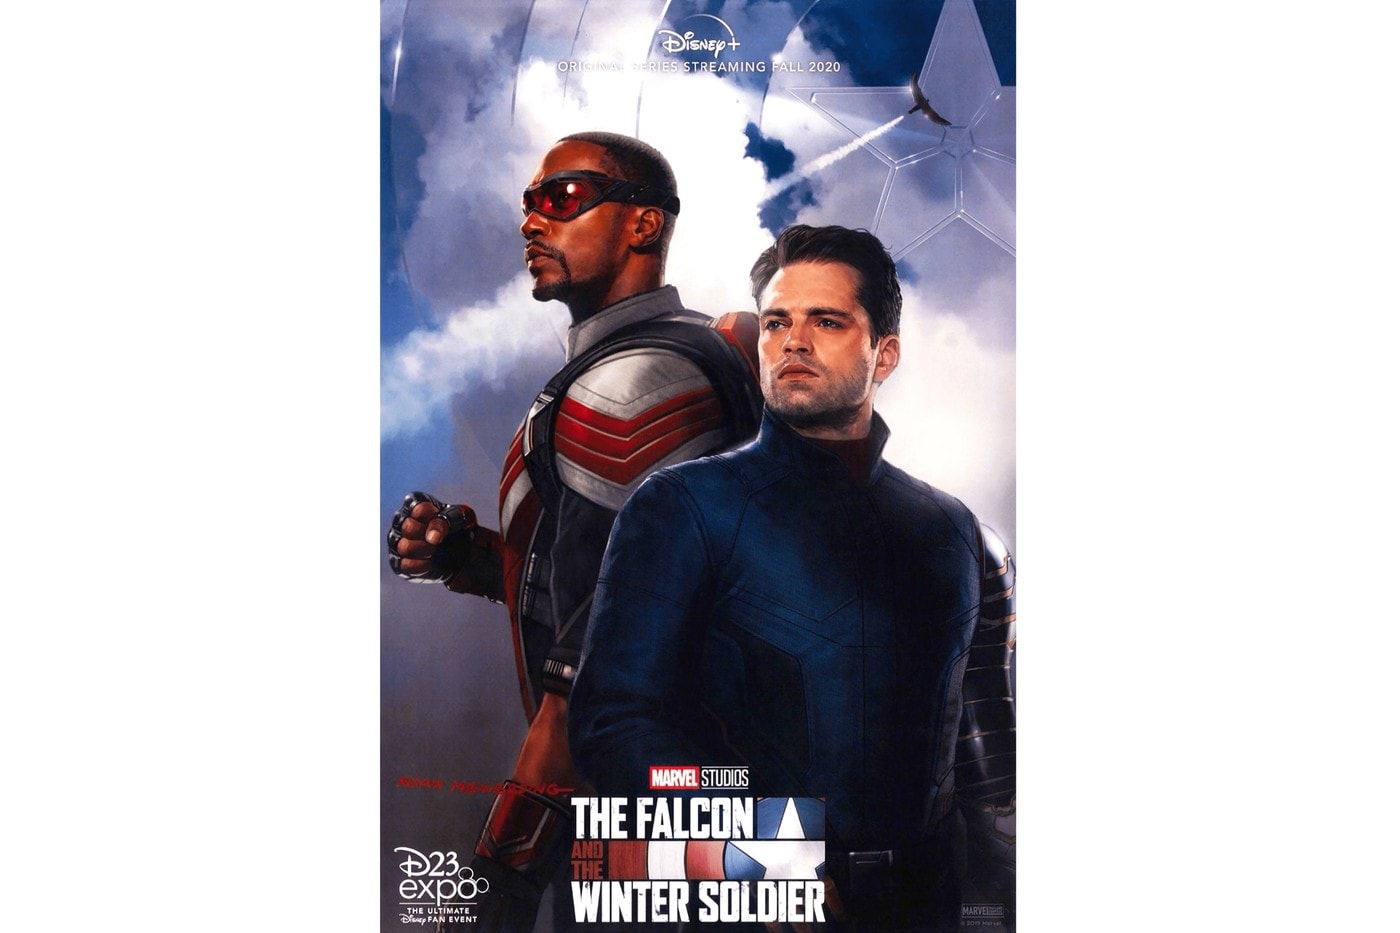 Marvel 全新英雄影集《The Falcon and The Winter Soldier》官方海報正式曝光